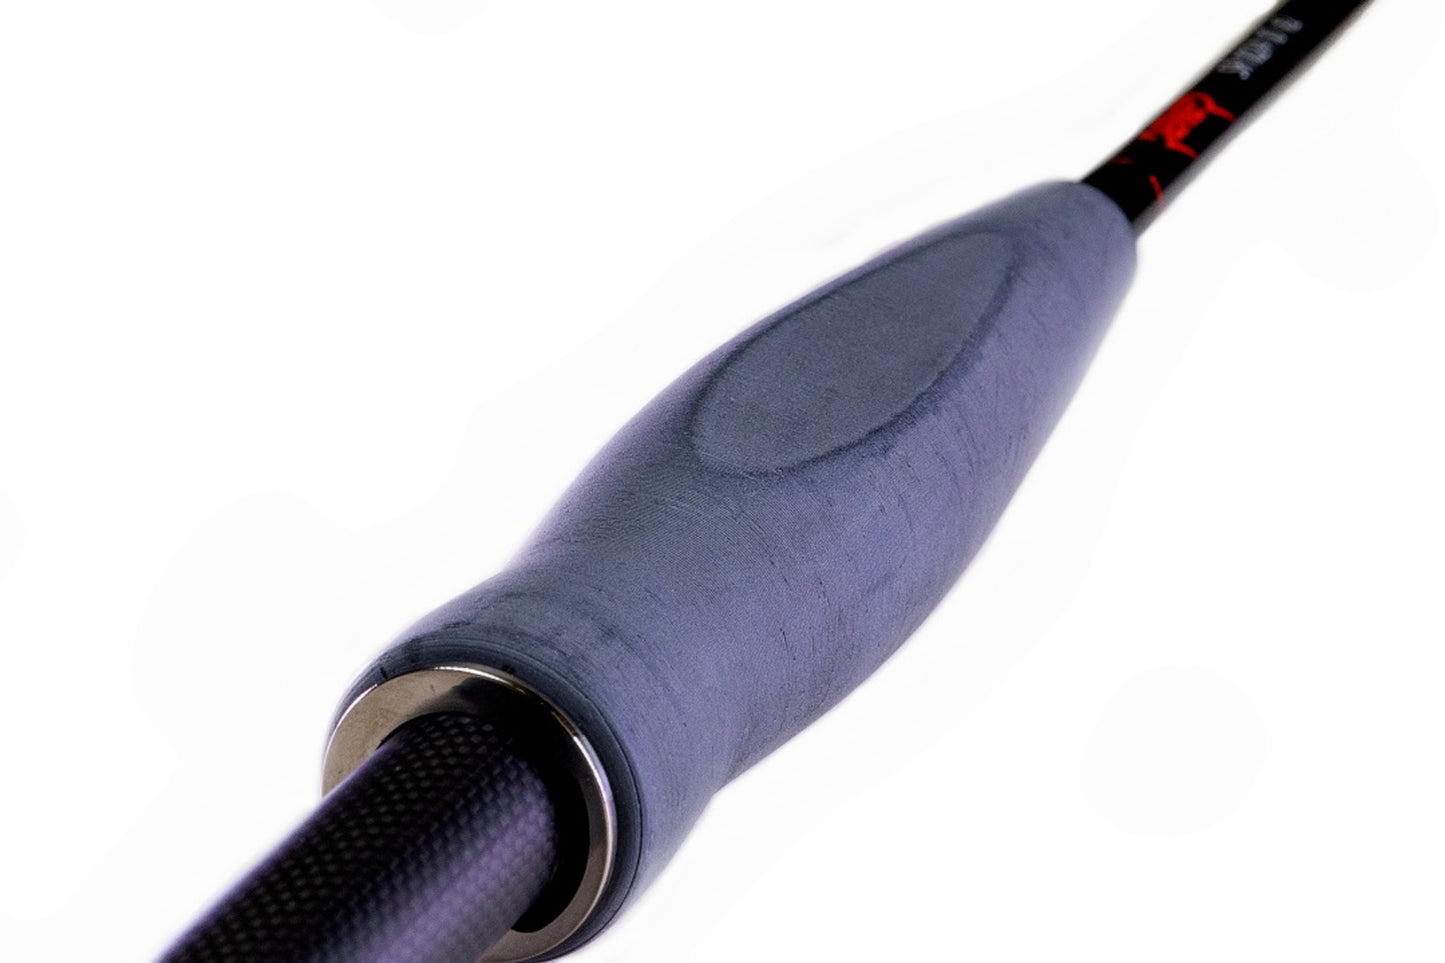 Syndicate Reaver Series Fly Rod